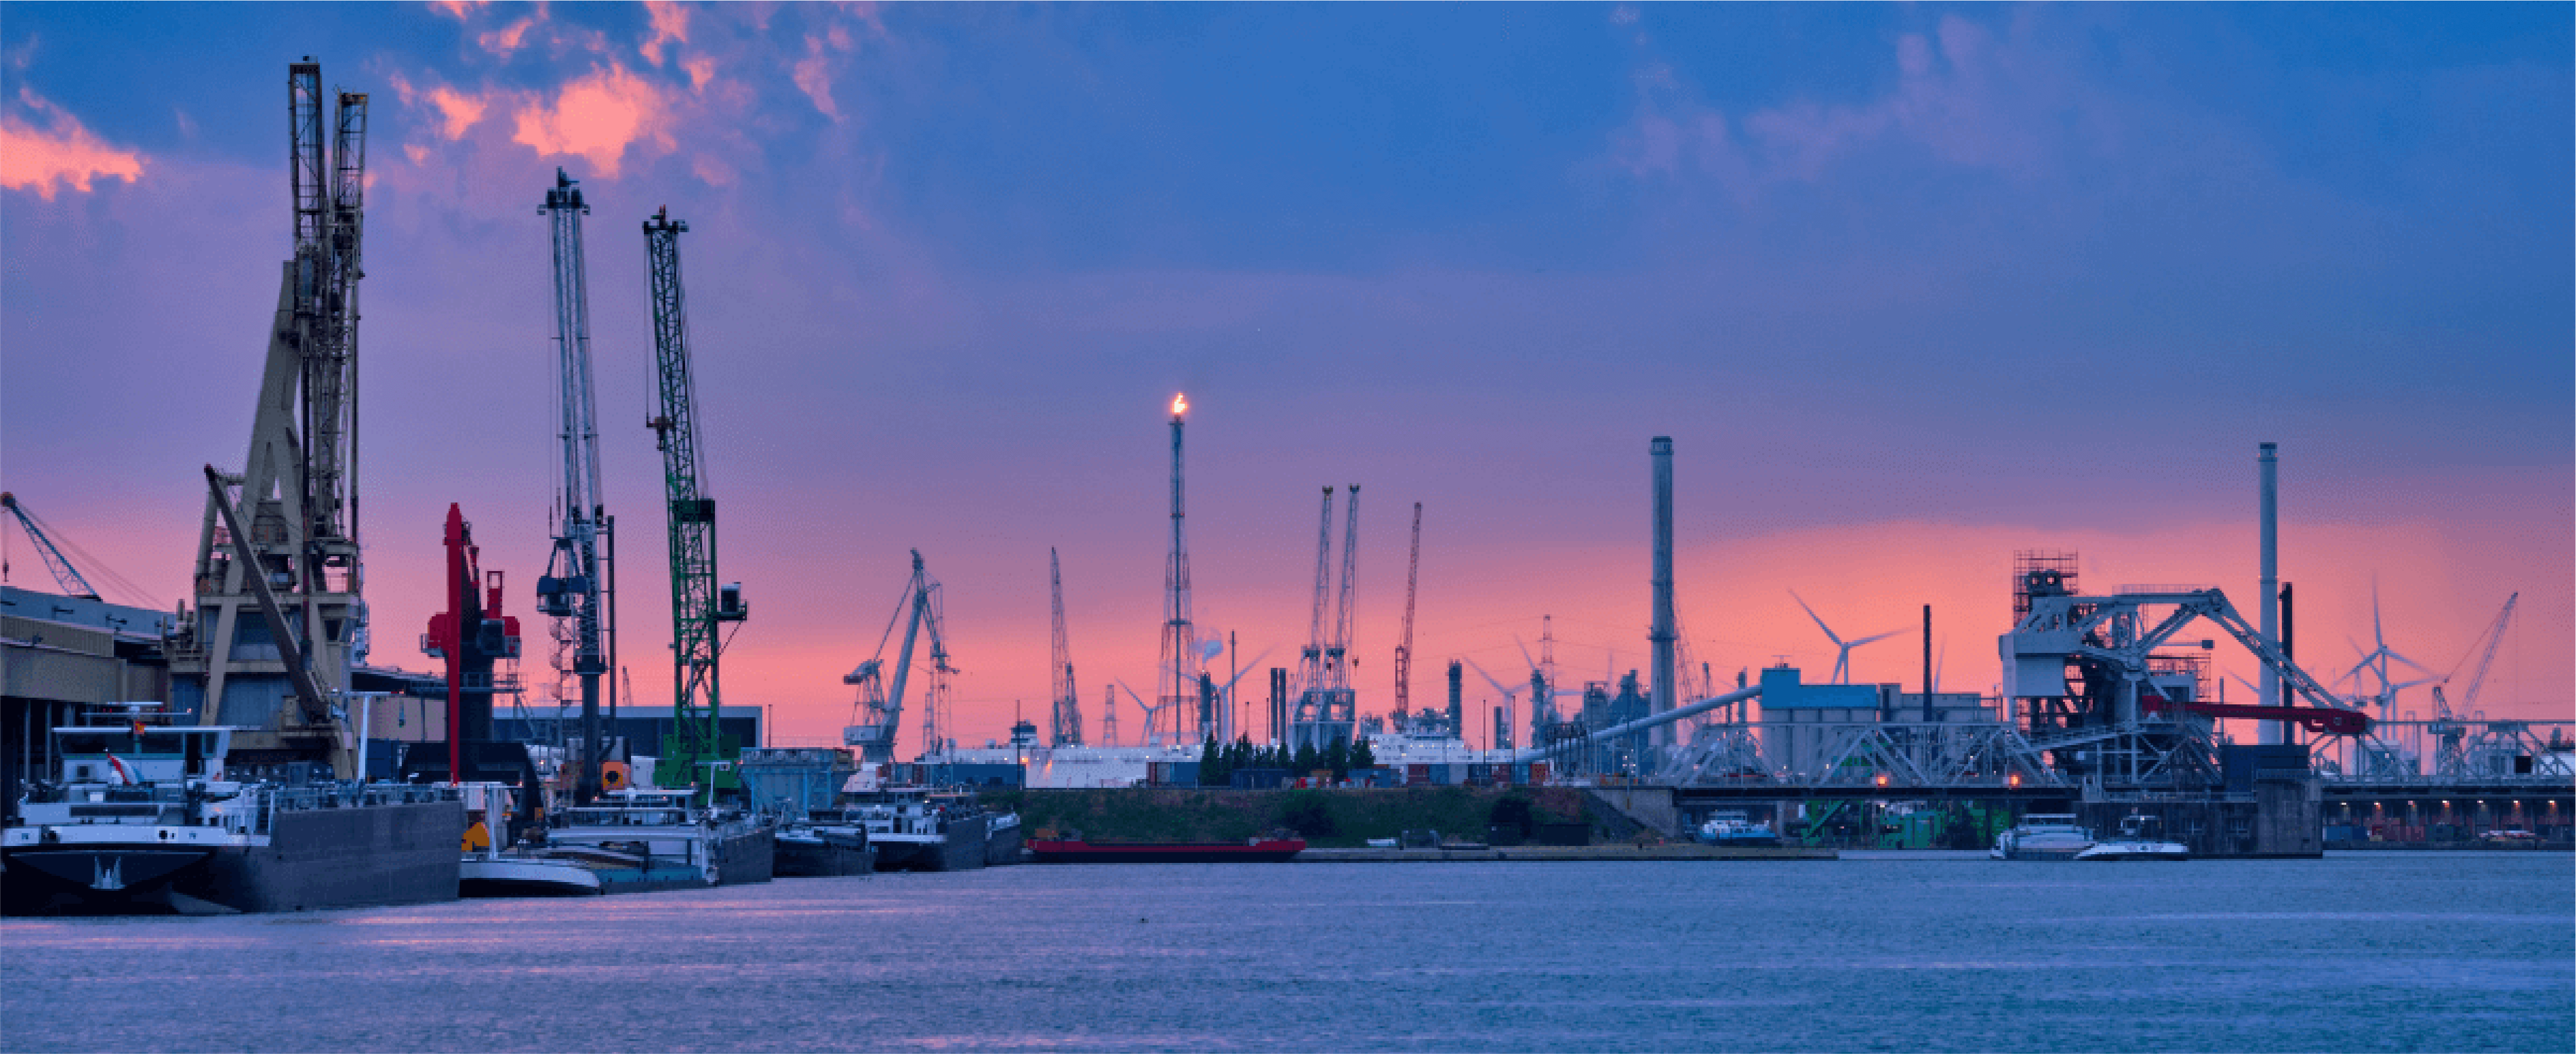 Customer Stories | How Datylon helped the Port of Antwerp design a concise KPI report